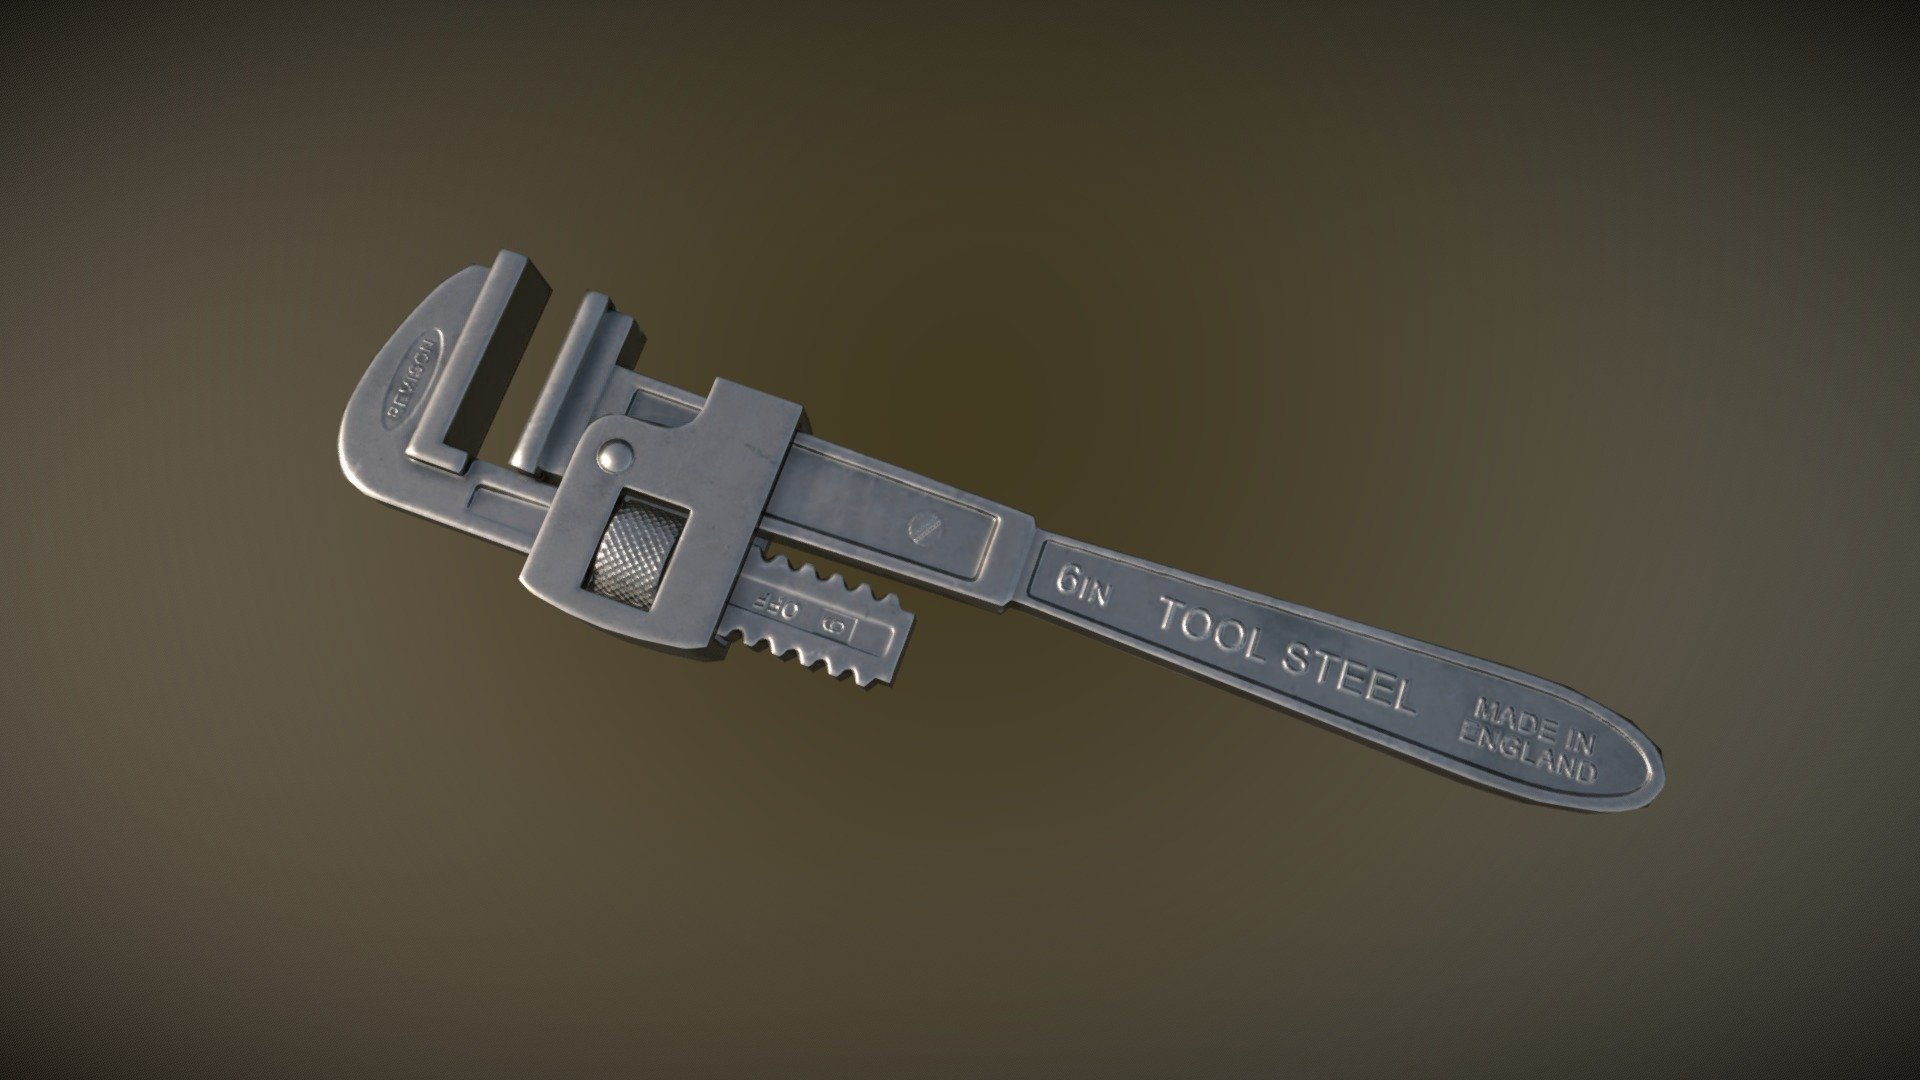 THE ADDITIONAL FILE INCLUDED: 
Formats: FBX 
PBR Texture : 1024x1024 textures 
Geometry: clear, smoothing group, lowpoly 
UVW Mapped: Non-overlapping. 
Materials: Yes 
Subdivision-ready: Yes
 - Tools_Pipe_Wrench_011220 - Download Free 3D model by 3D Error 404 (@3DError404) 3d model